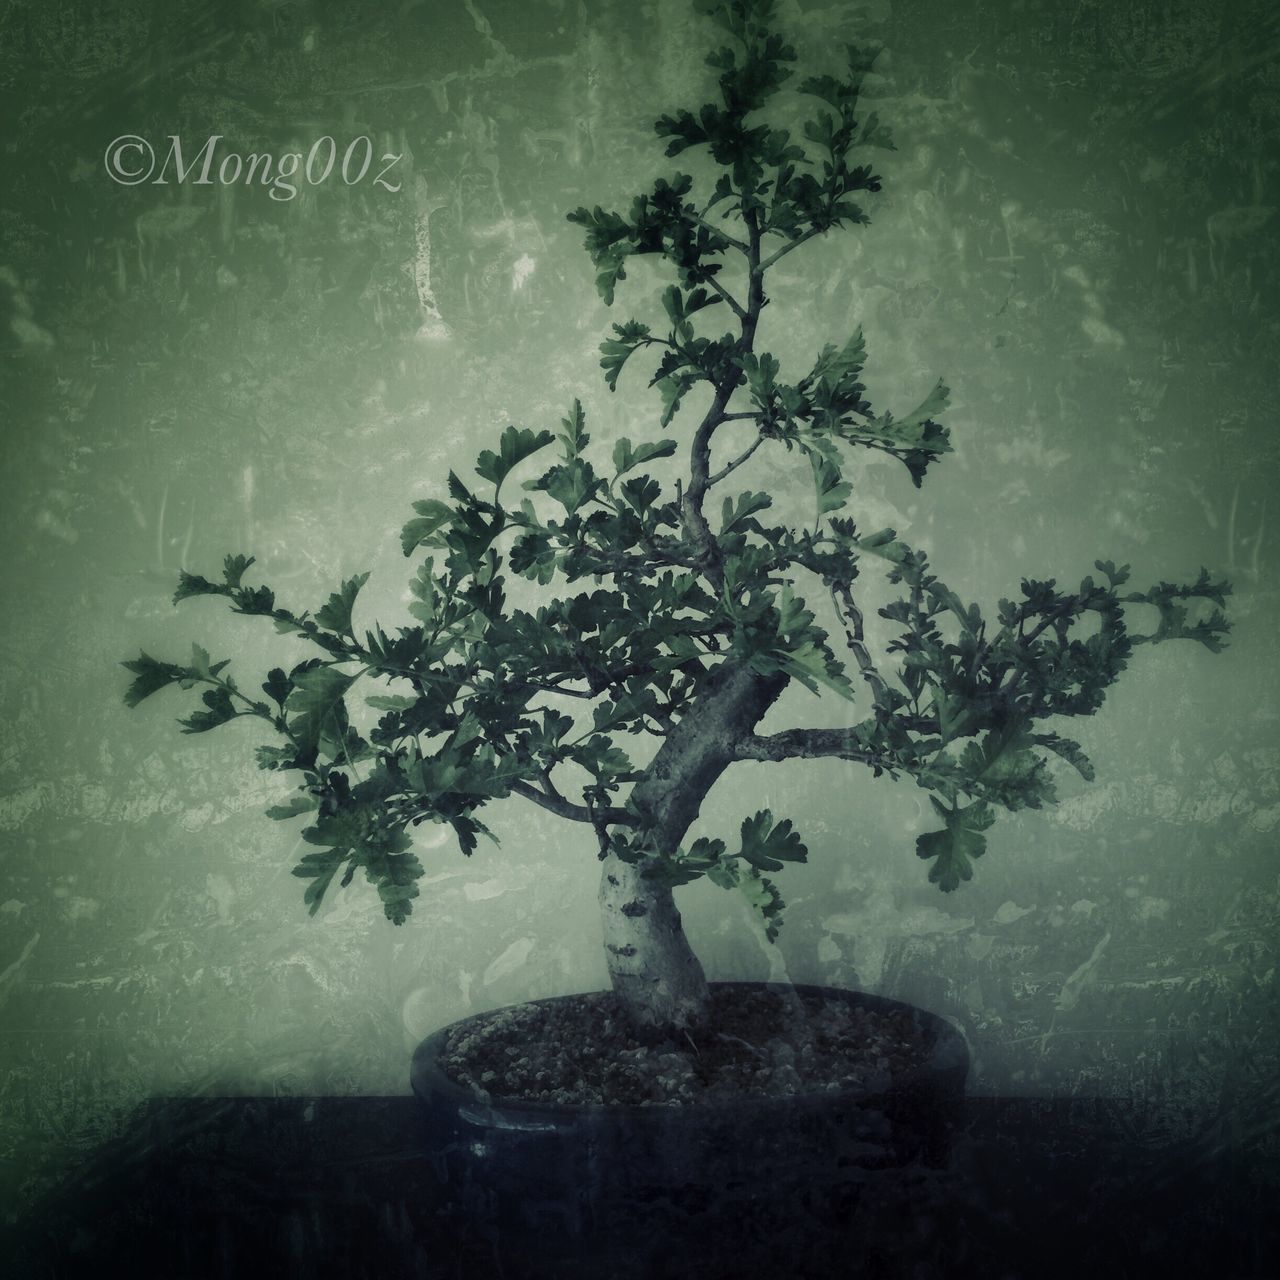 growth, tree, plant, nature, bonsai tree, no people, indoors, beauty in nature, day, olive tree, single tree